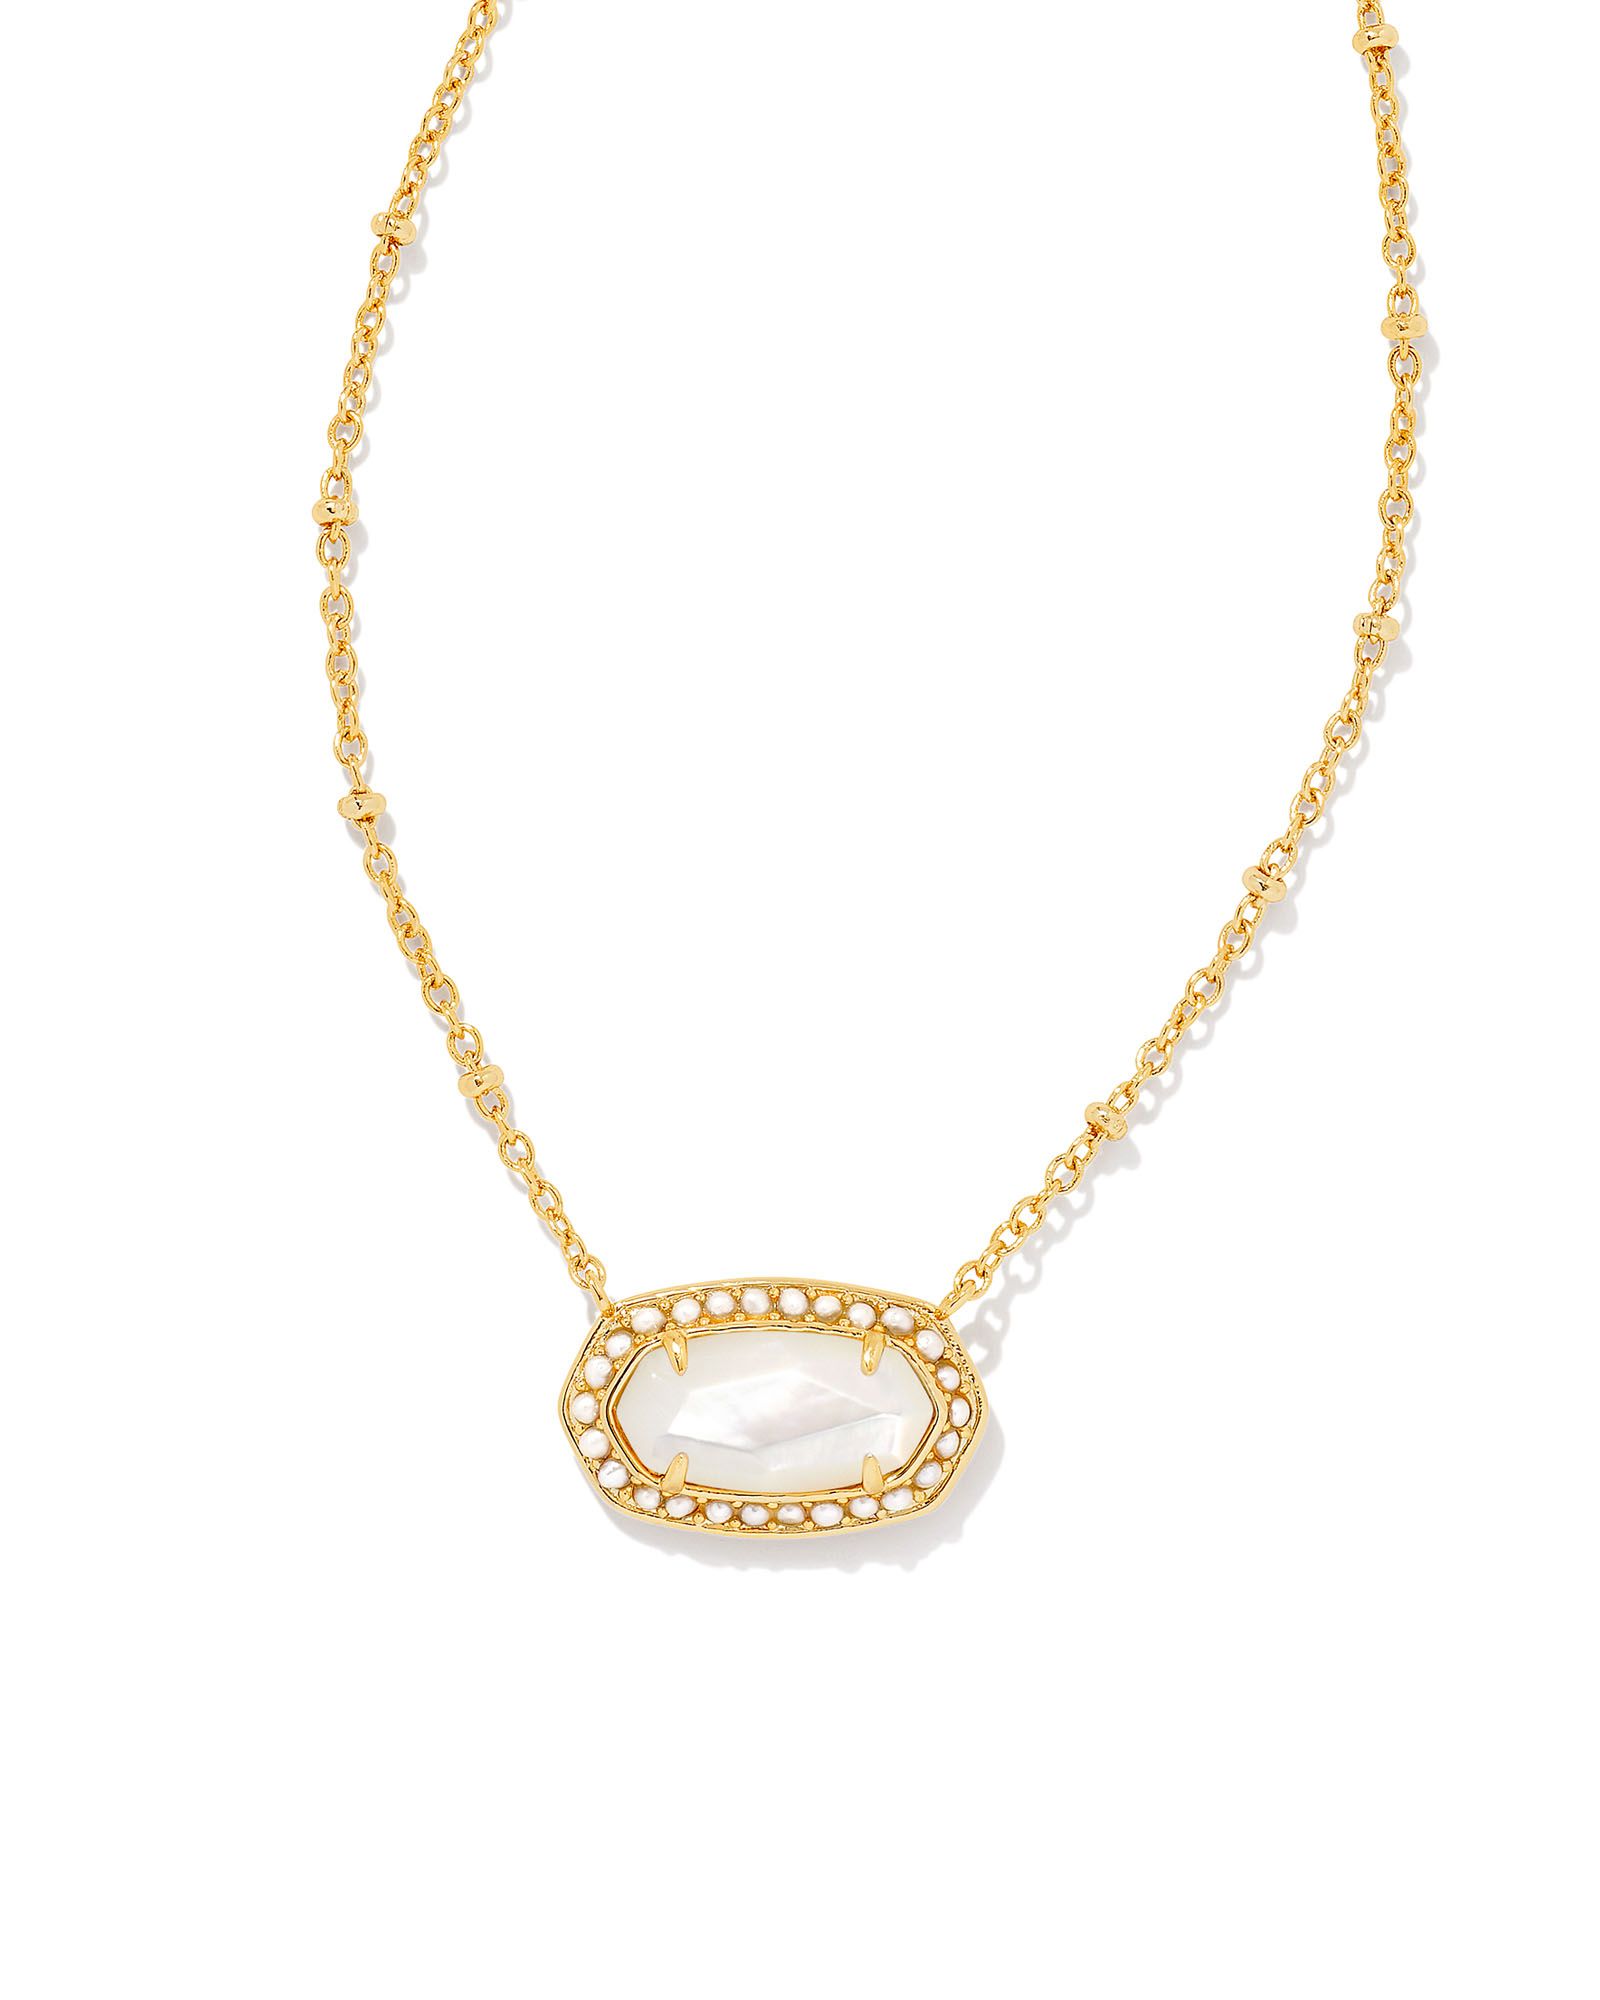 Pearl Beaded Elisa Gold Pendant Necklace in Ivory Mother-of-Pearl | Kendra Scott | Kendra Scott